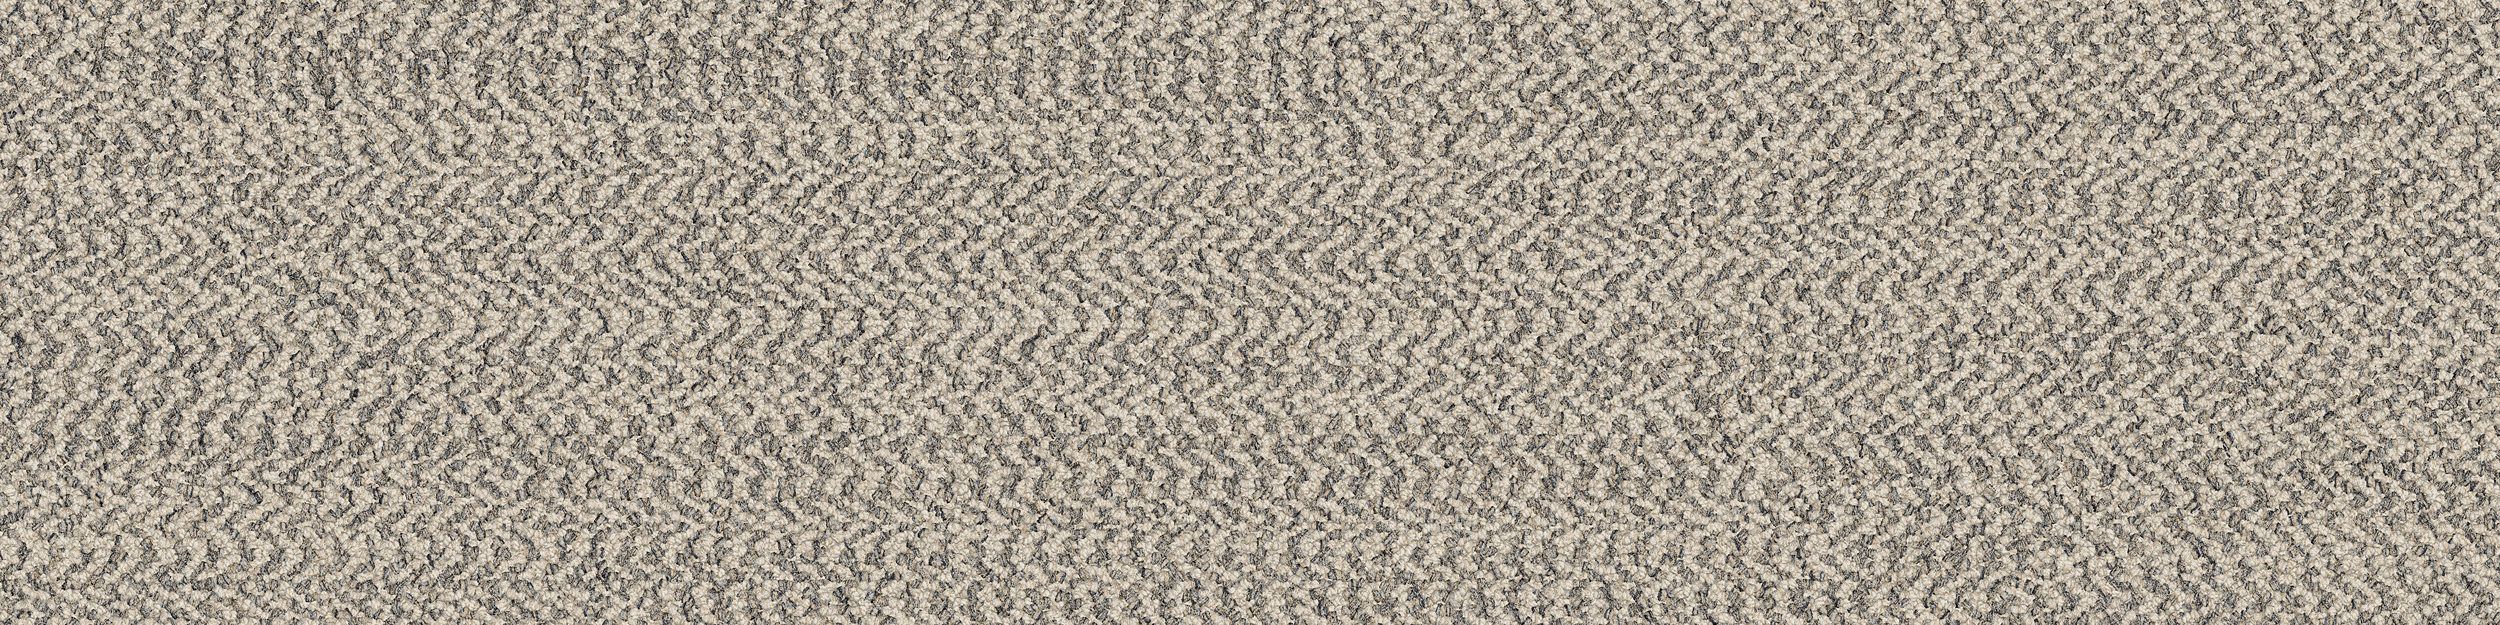 Third Space 307 Carpet Tile in Shell image number 2